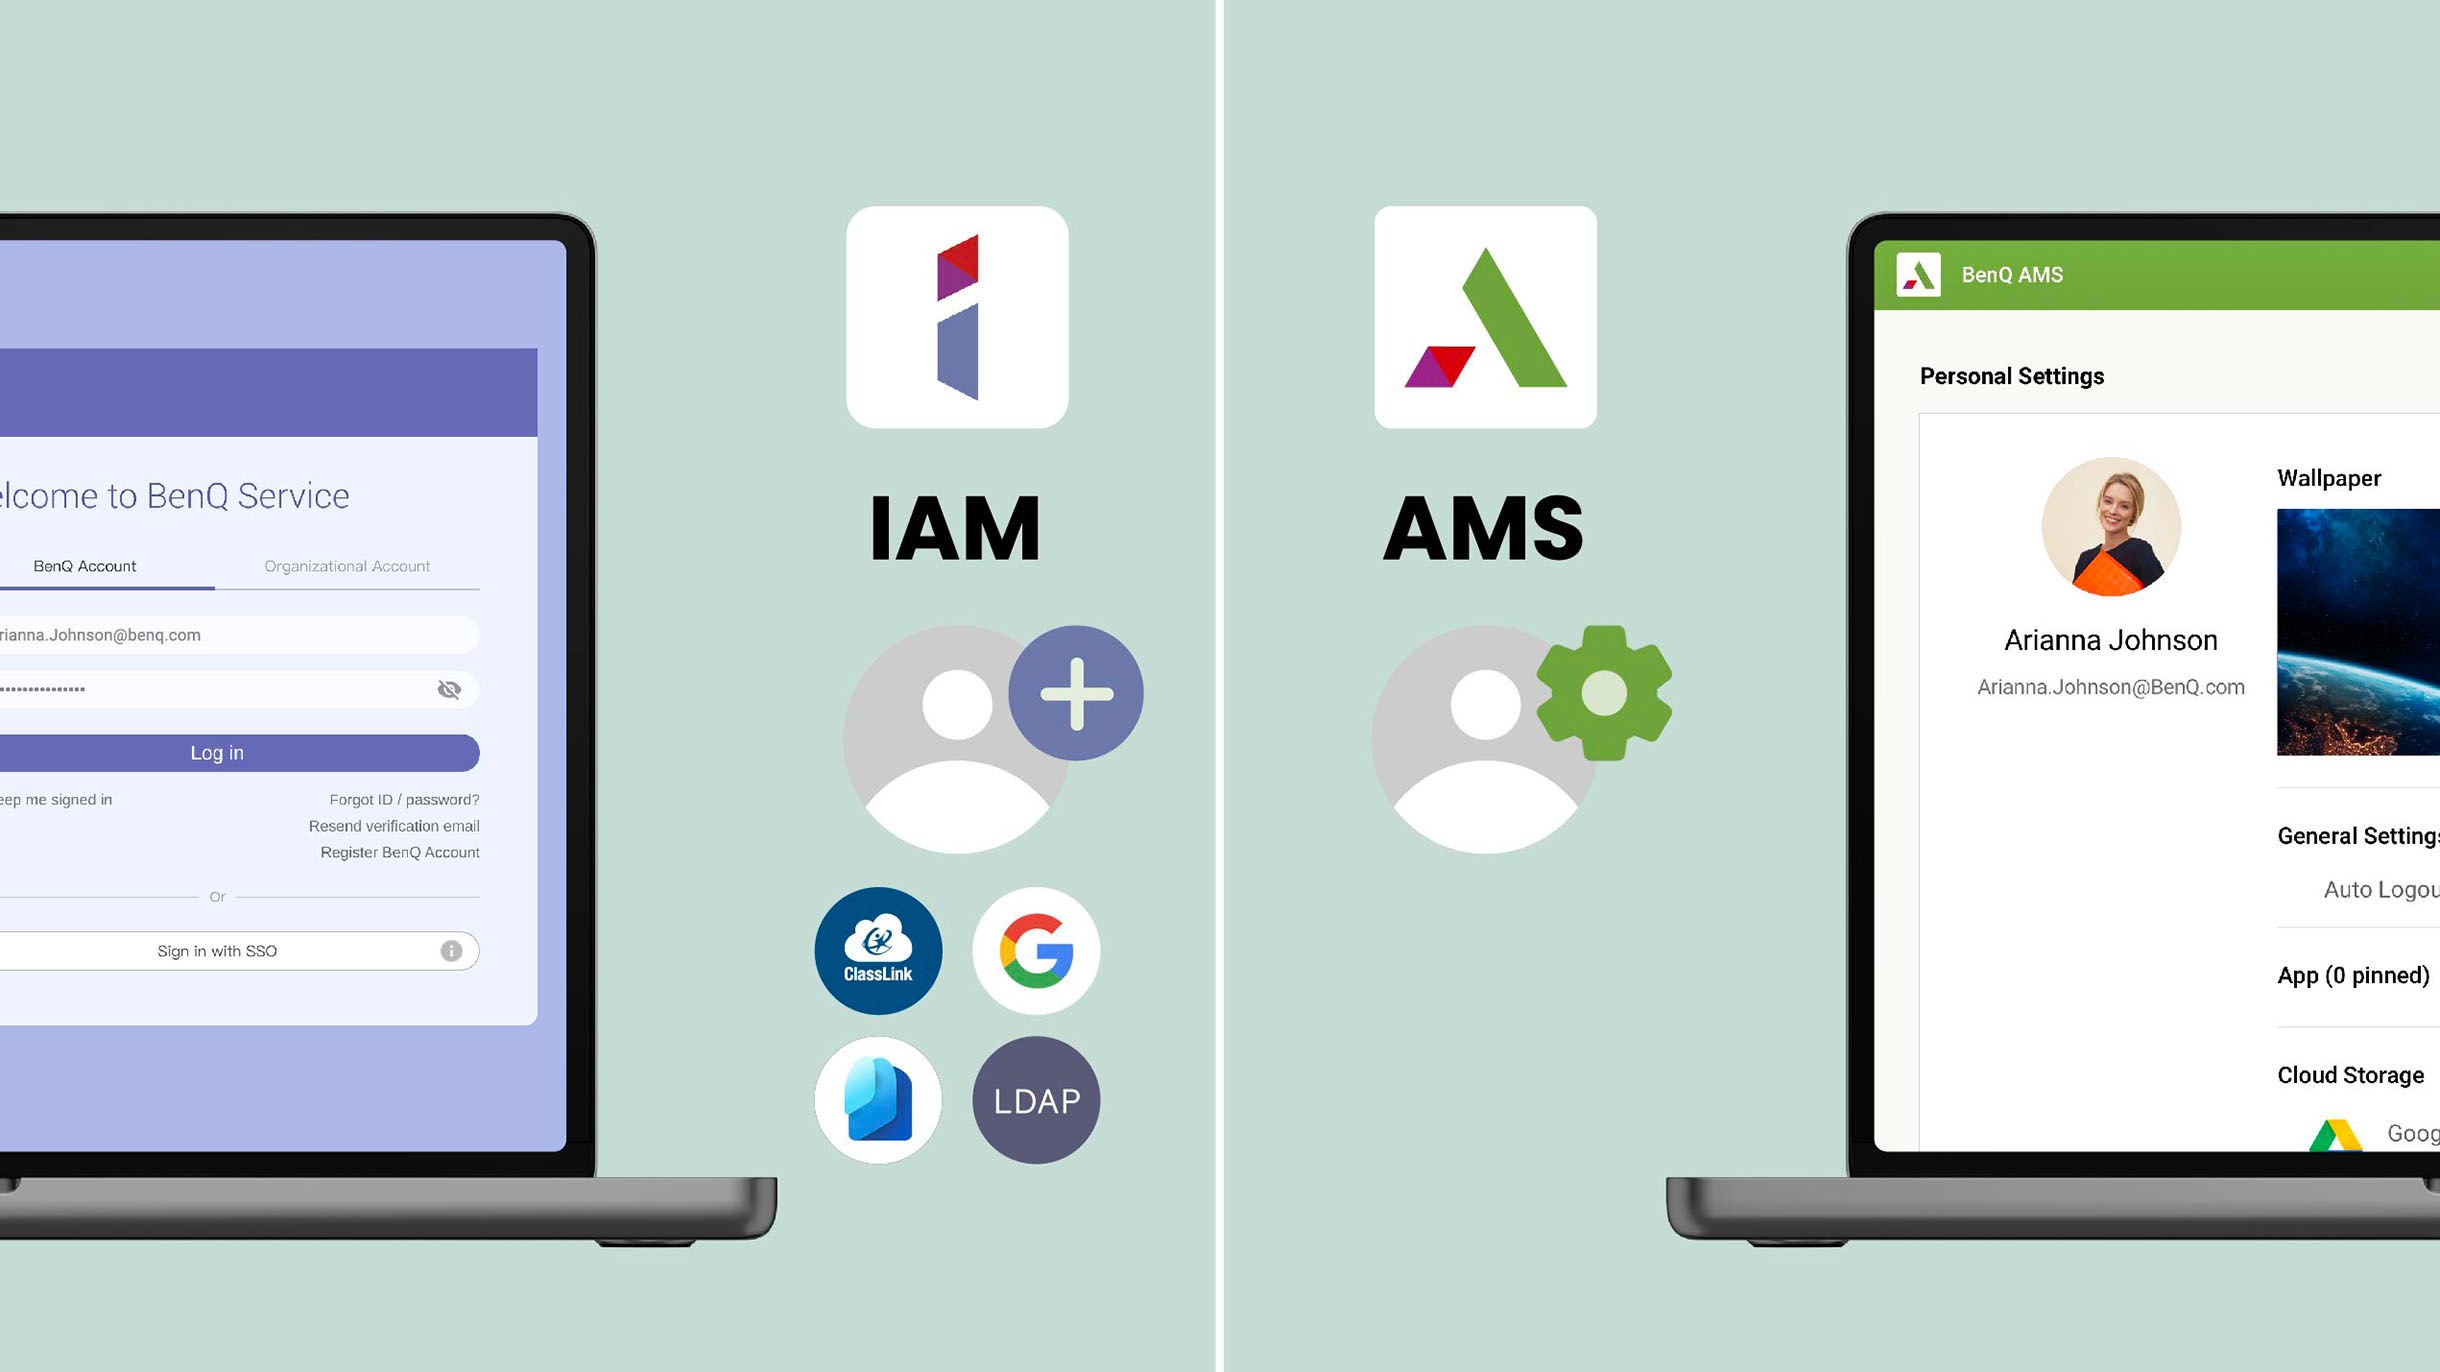 IAM and AMS icons and interfaces on two different laptops